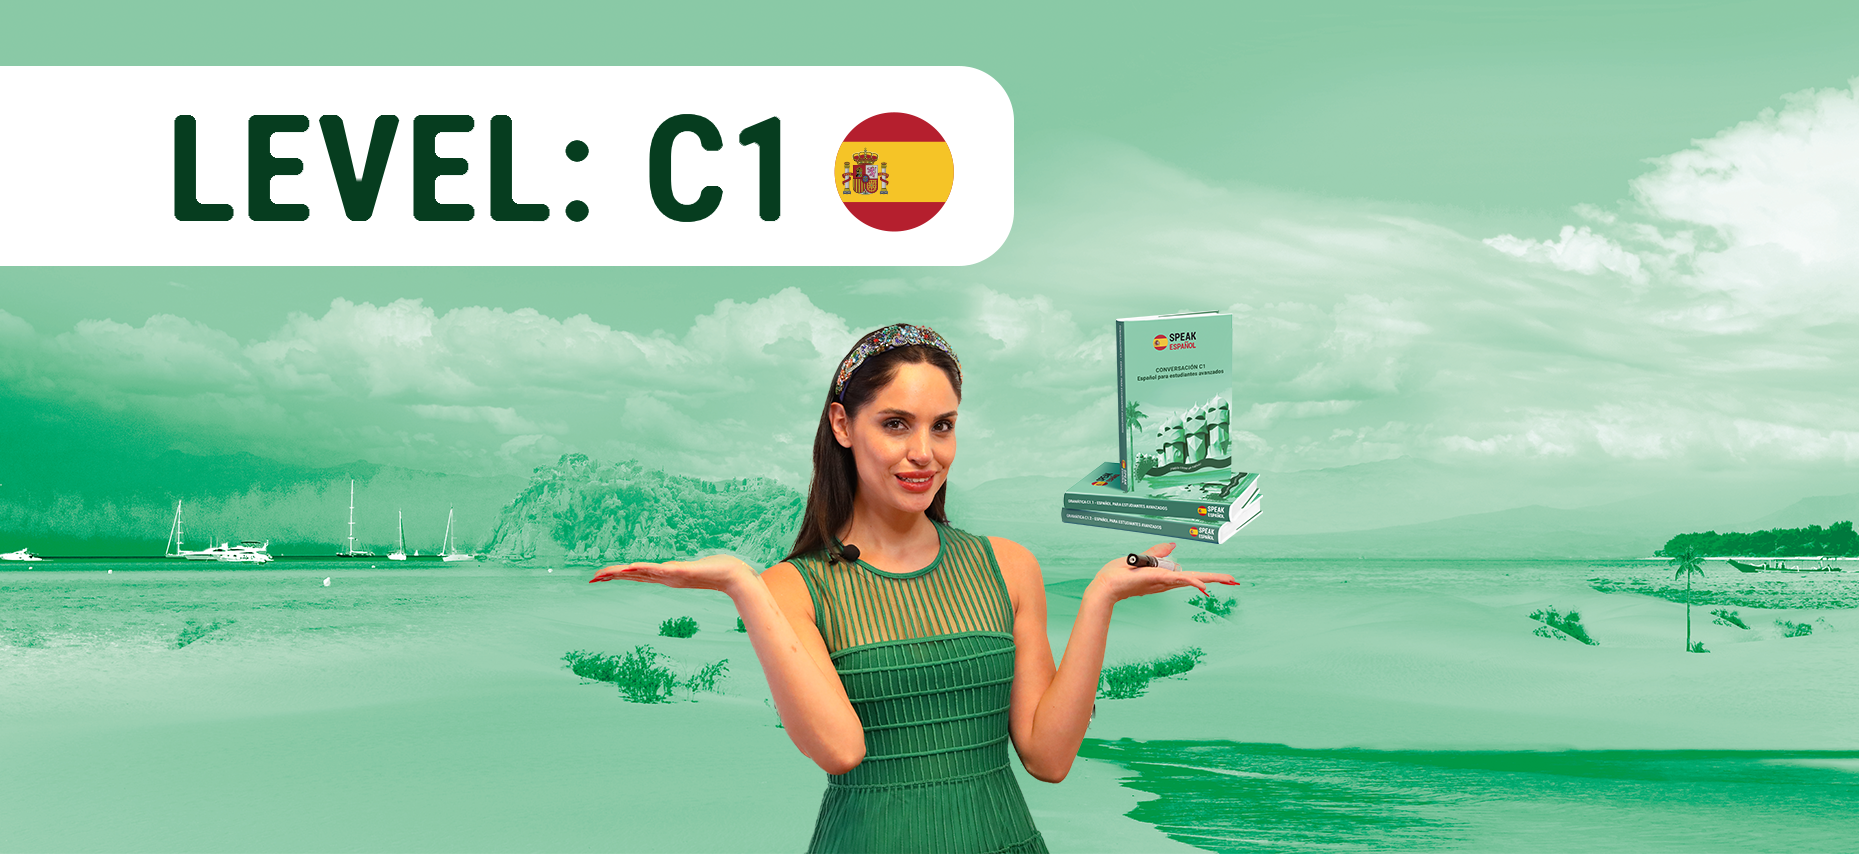 C1 level intensive Spanish course with teacher follow up